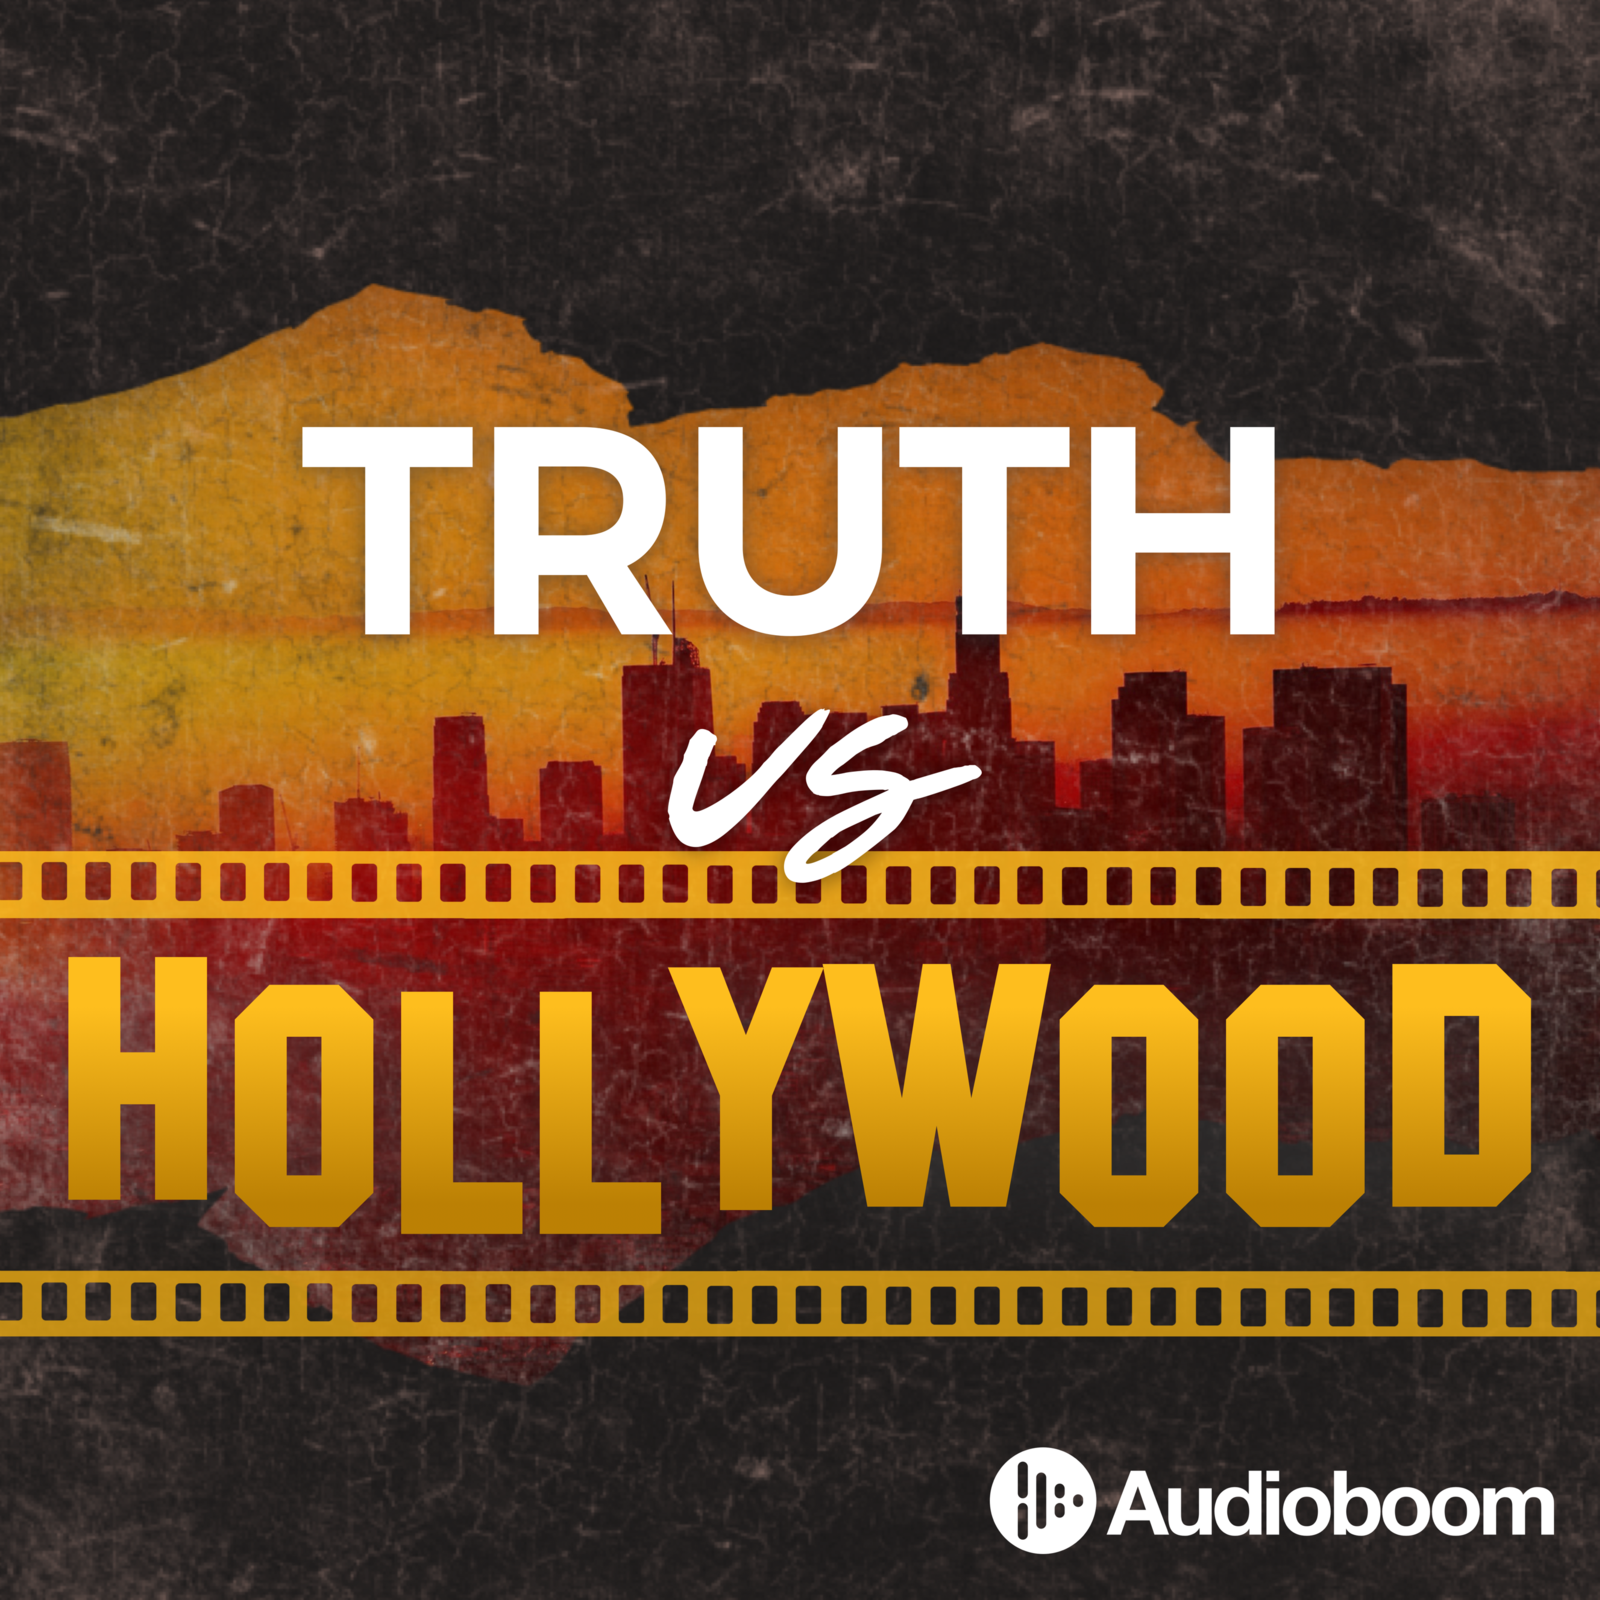 Introducing Truth vs Hollywood